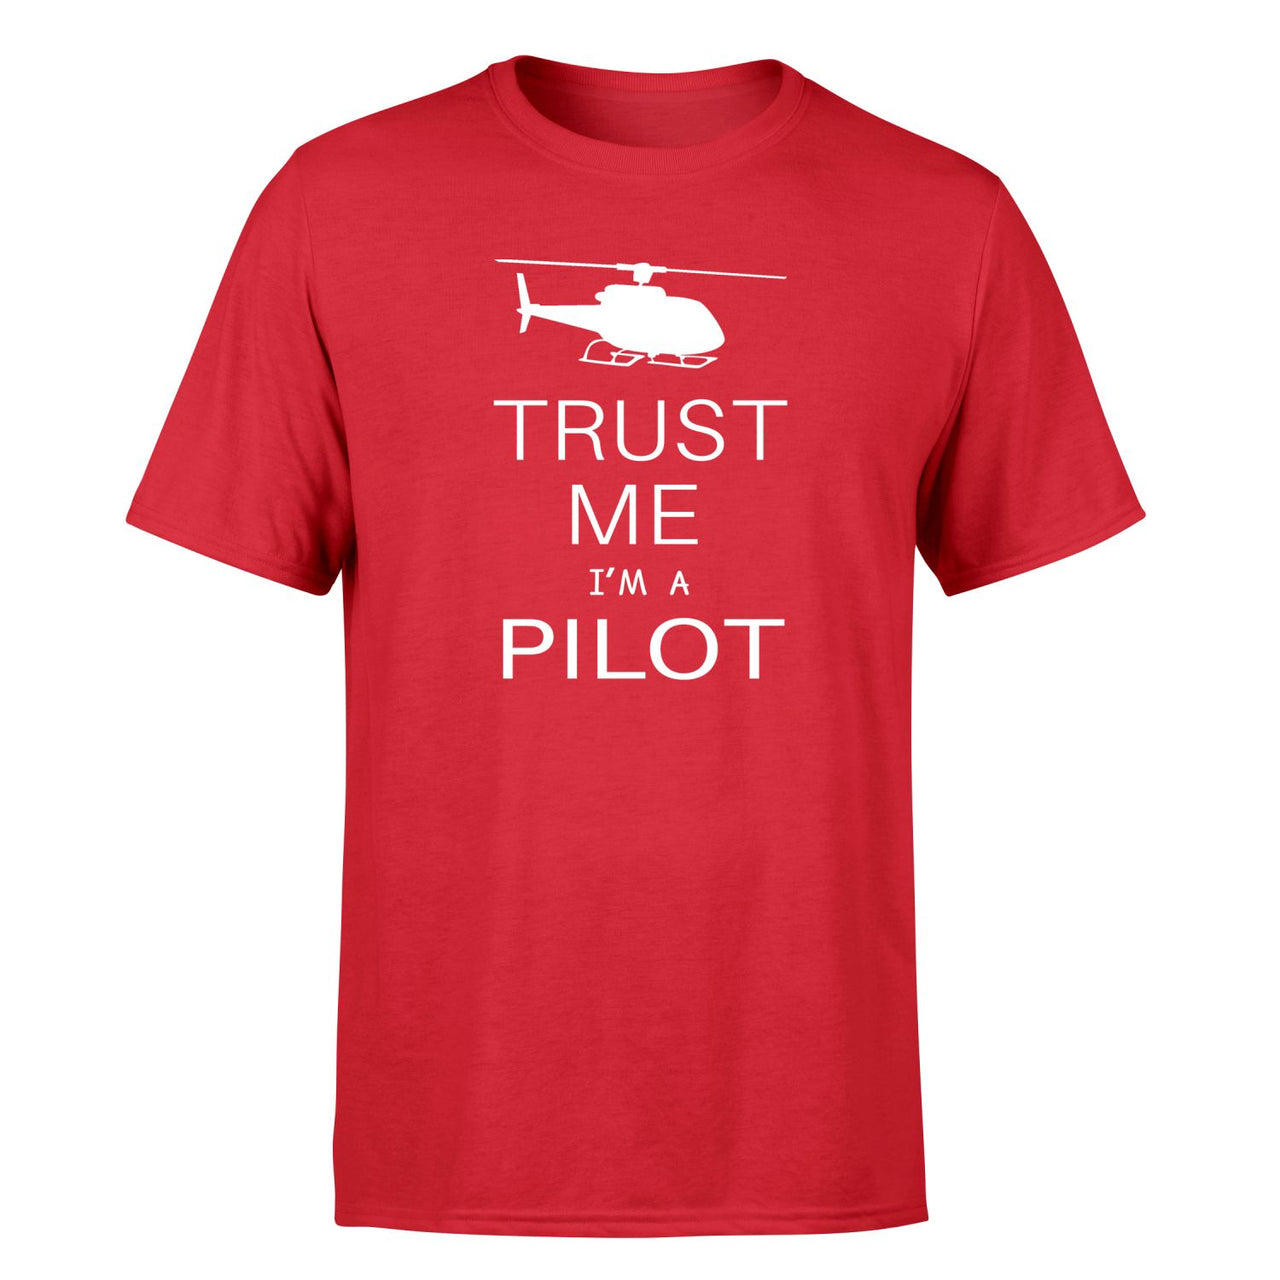 Trust Me I'm a Pilot (Helicopter) Designed T-Shirts